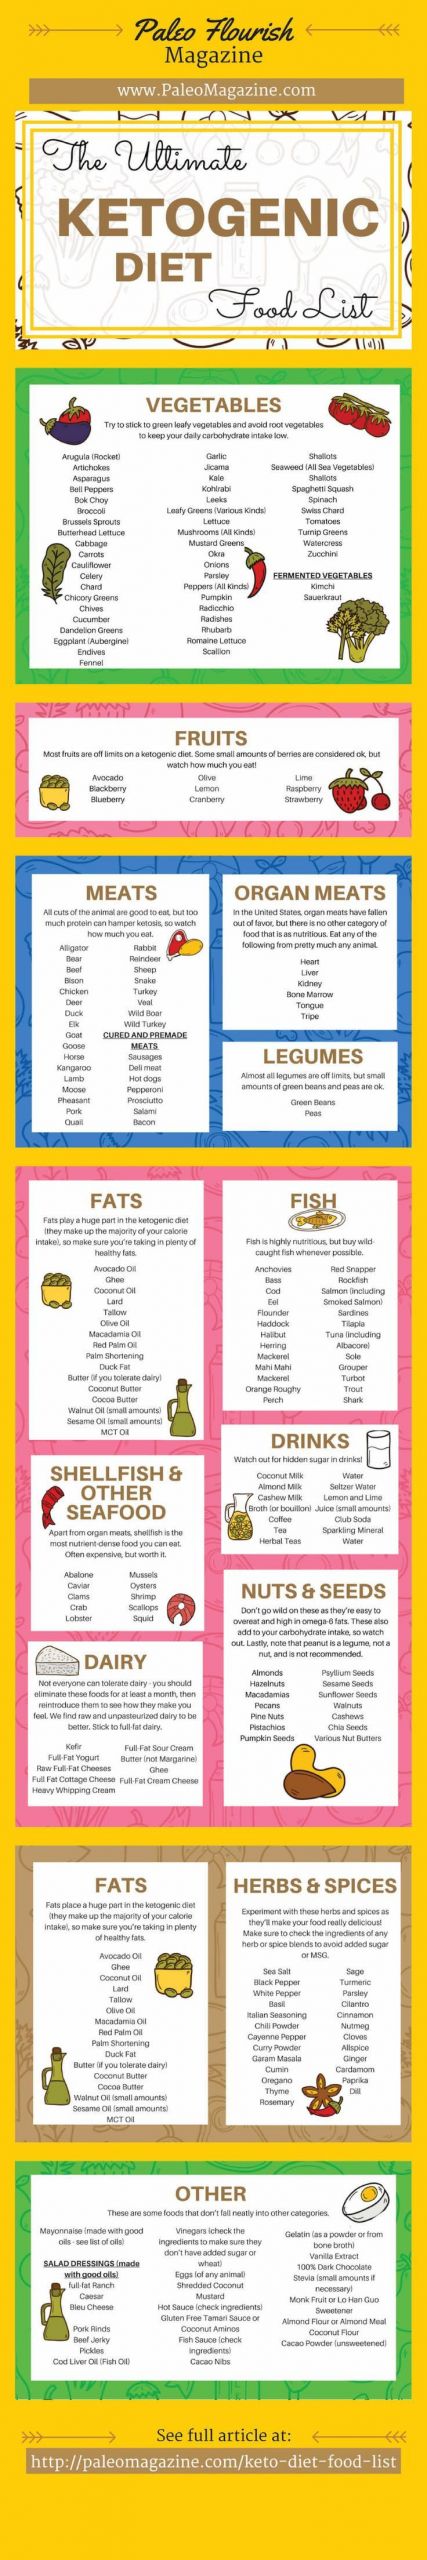 Keto Diet Food List Losing Weight
 427 best Belly Fat Loss images on Pinterest